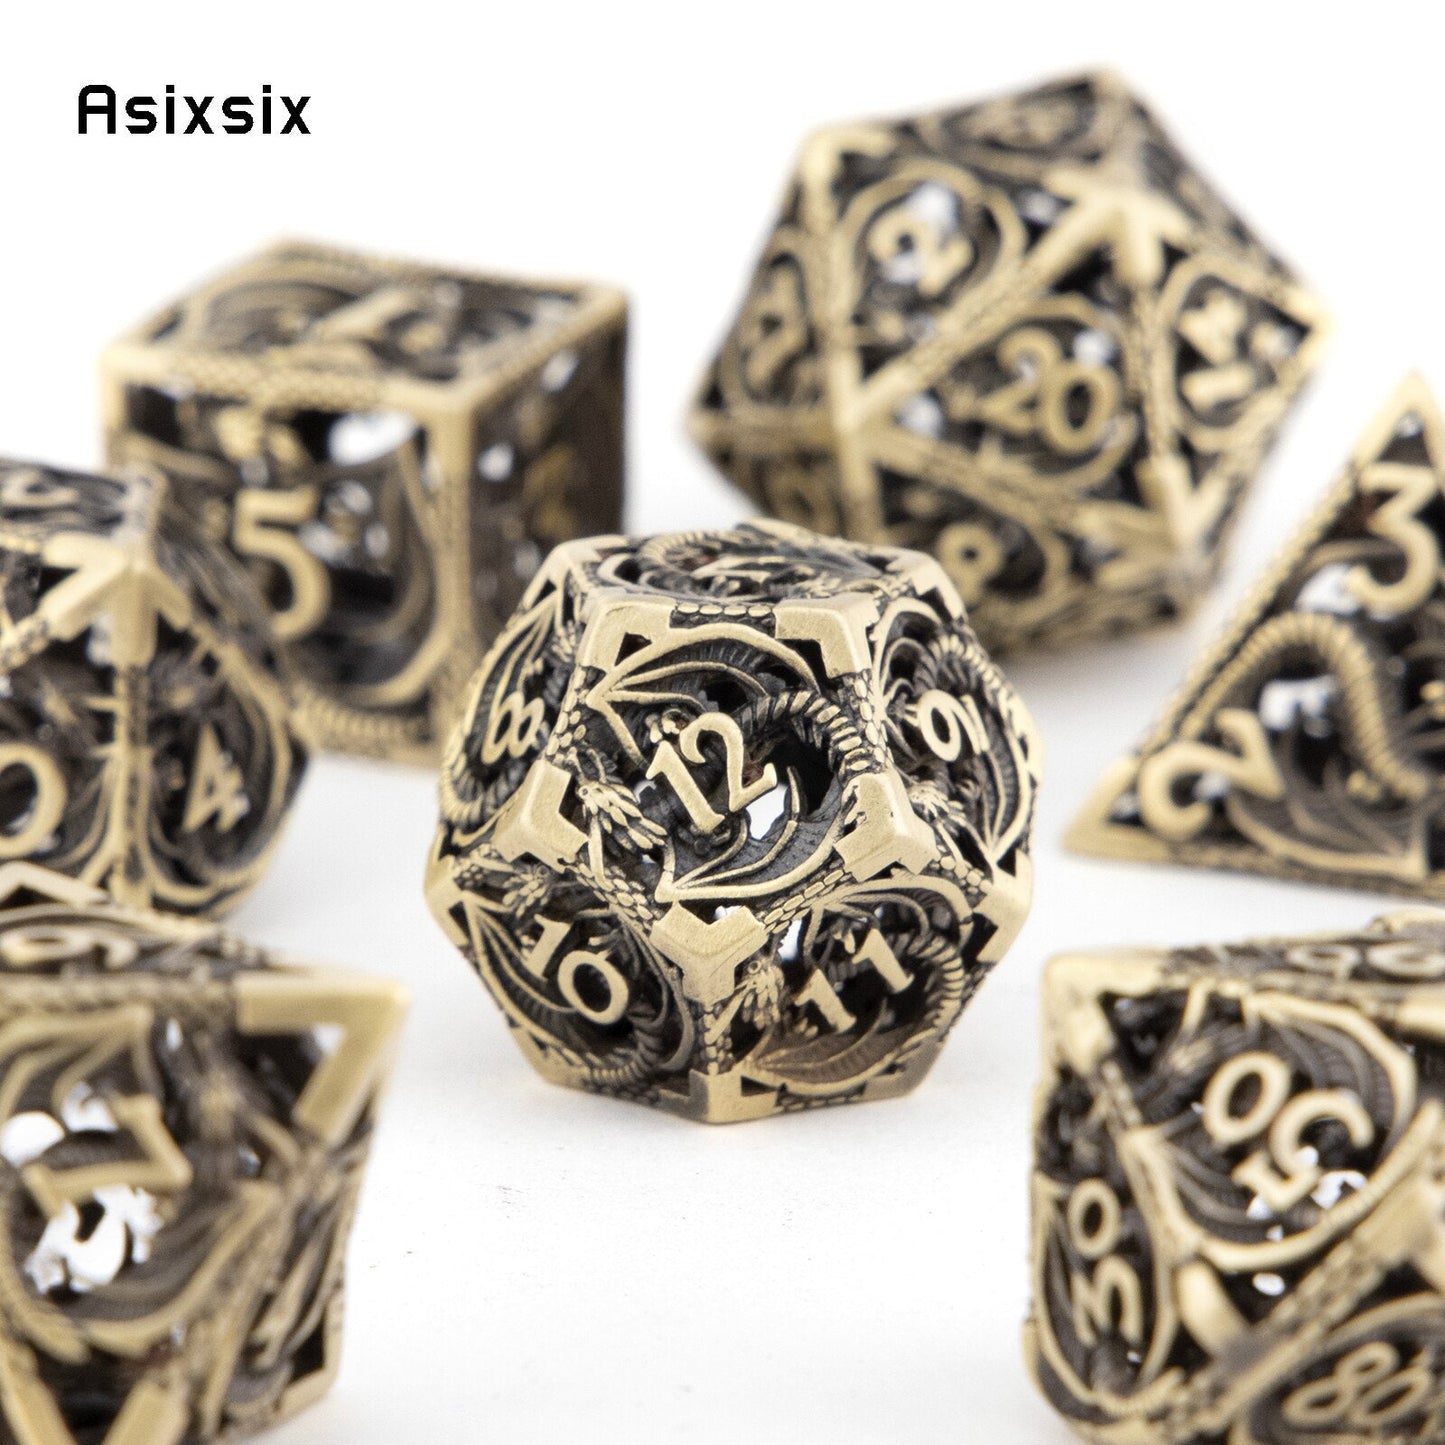 7 Pcs Golden Black Dragon Metal Dice Hollow Metal Polyhedral Dice Set Suitable for Role-Playing RPG  Board Game Card Game